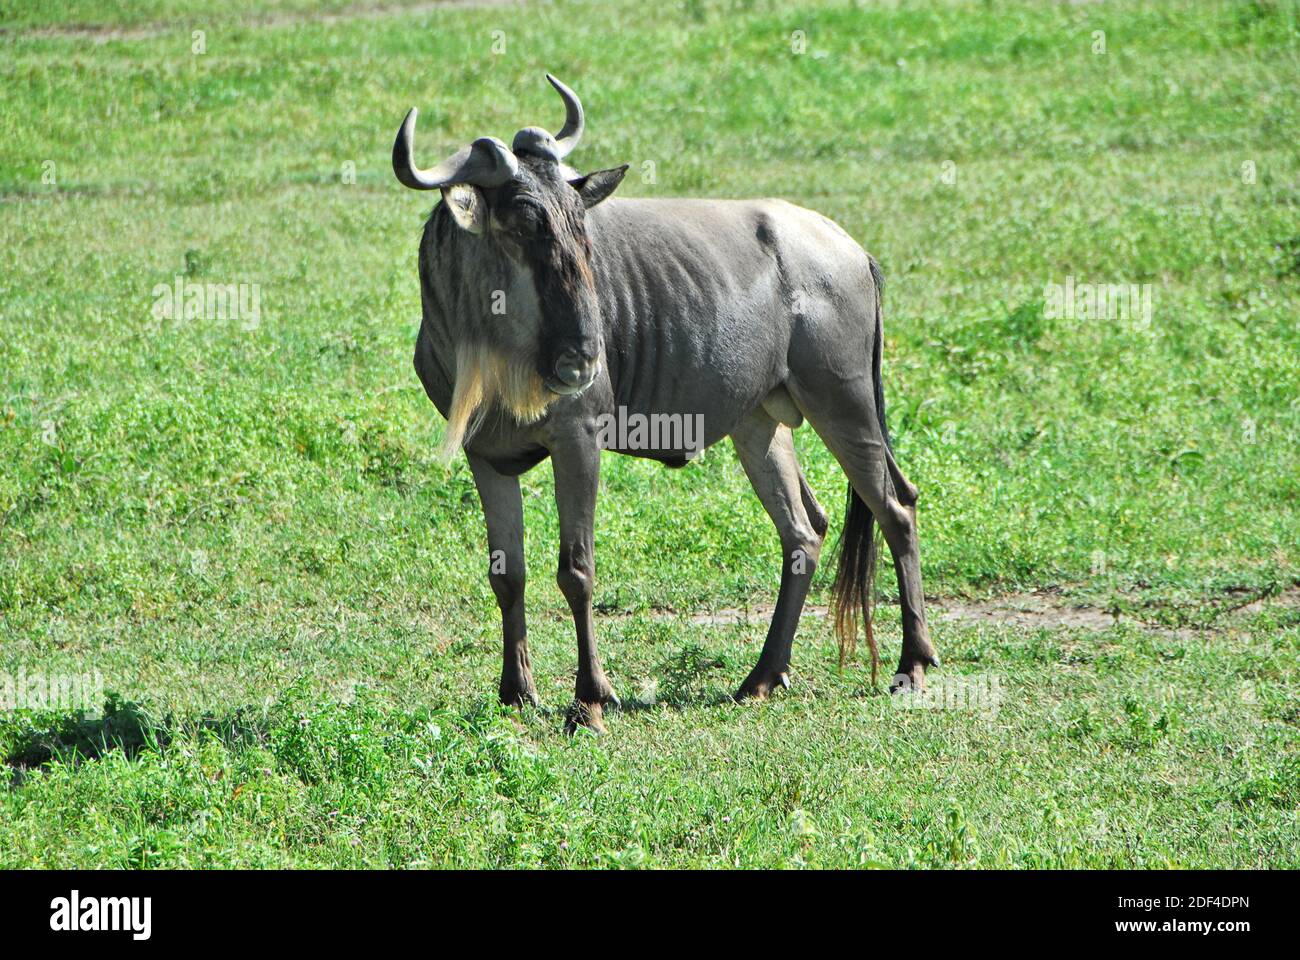 A mother wildebeest turns to check on her baby, in the Ngorongoro Crater, in Tanzania, Africa. Stock Photo